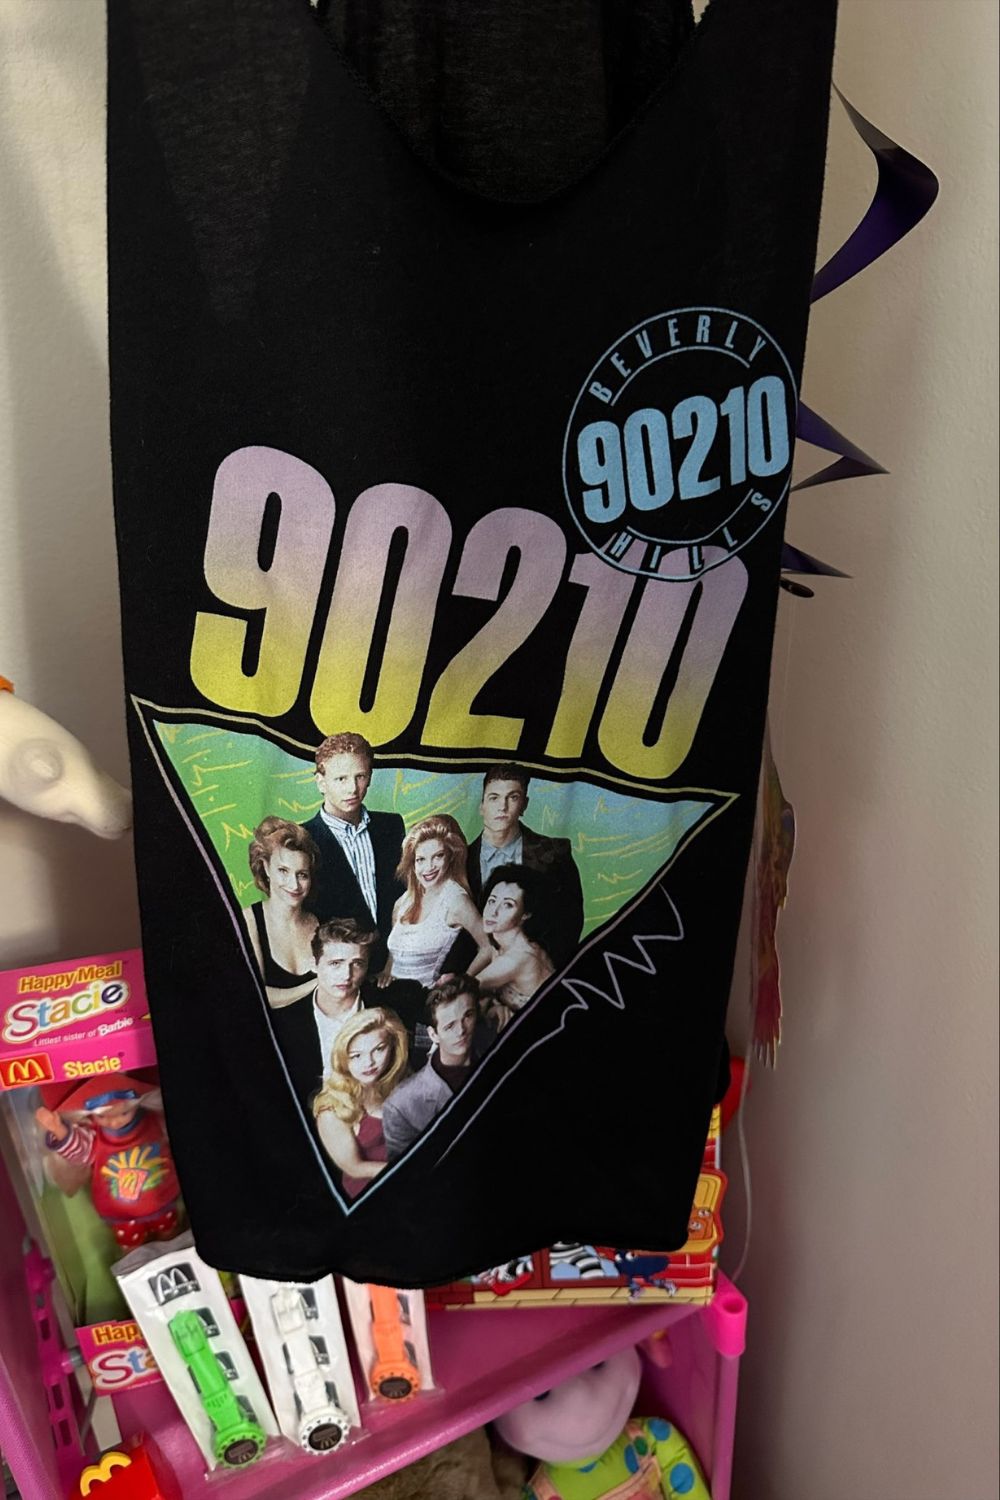 BEVERLY HILLS 90210 PHOTO TANK - SIZE S*